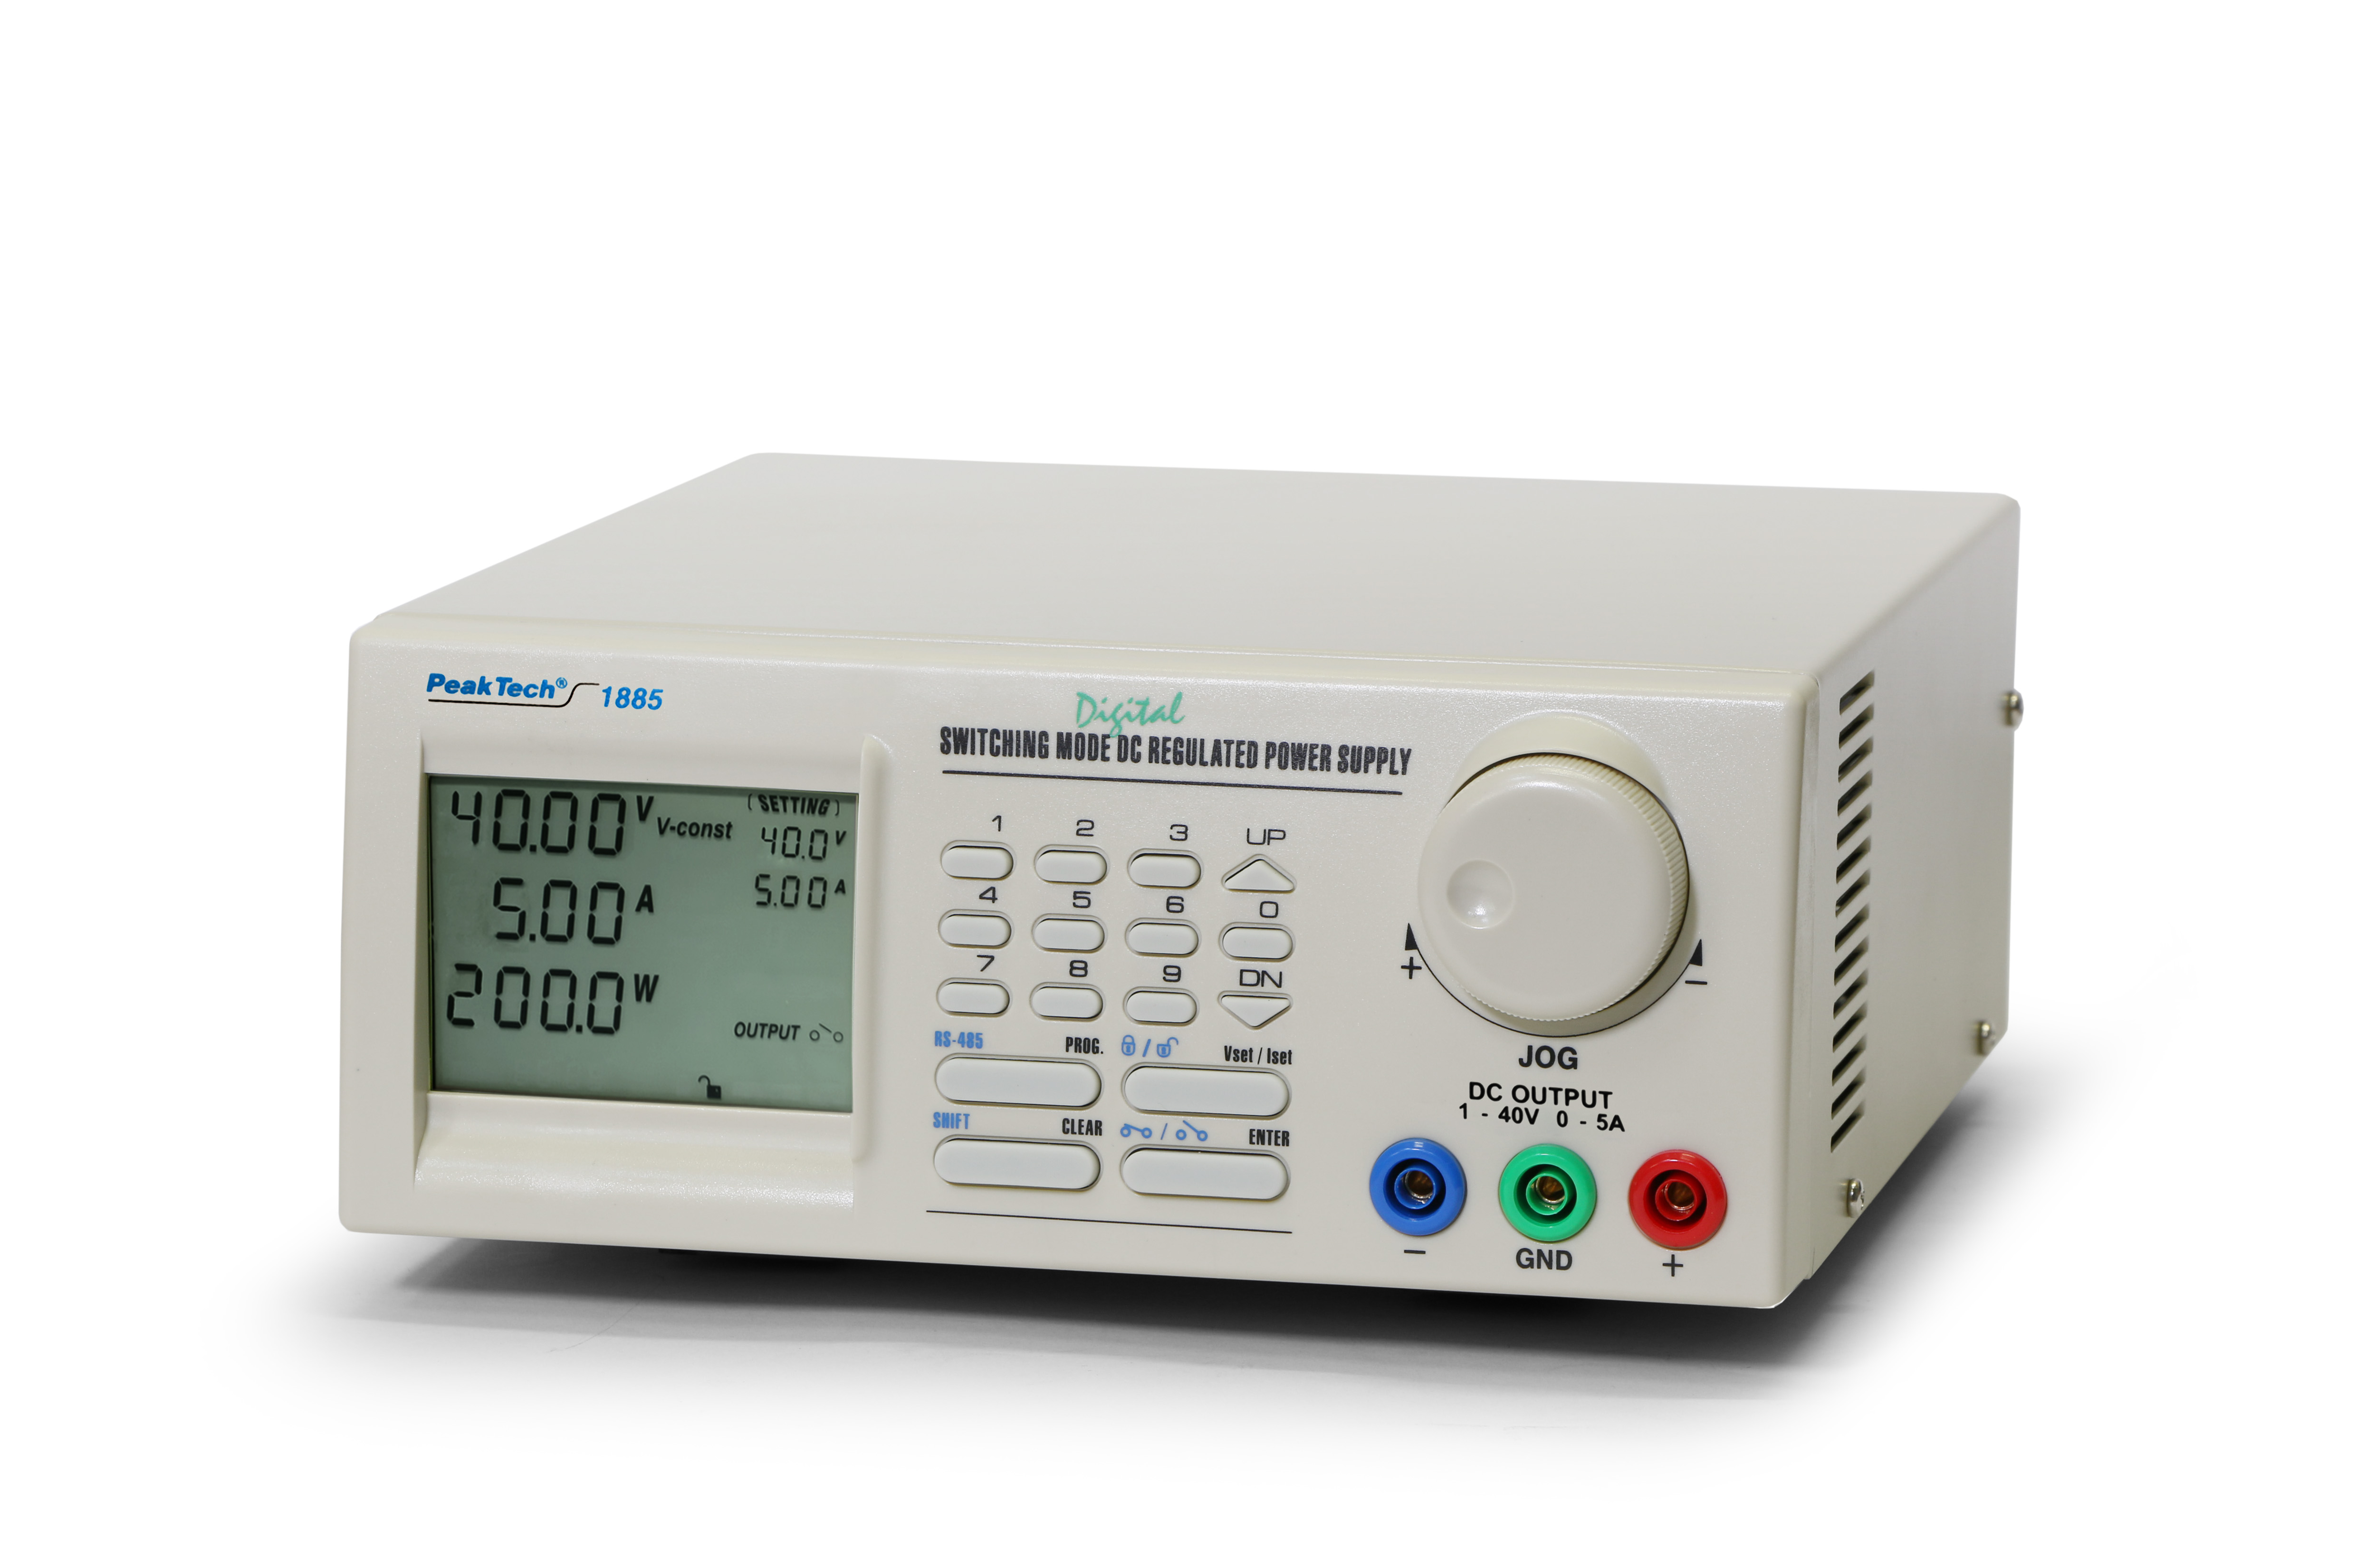 «PeakTech® P 1885» Laboratory power supply DC 1 - 40V / 0 - 5A with USB